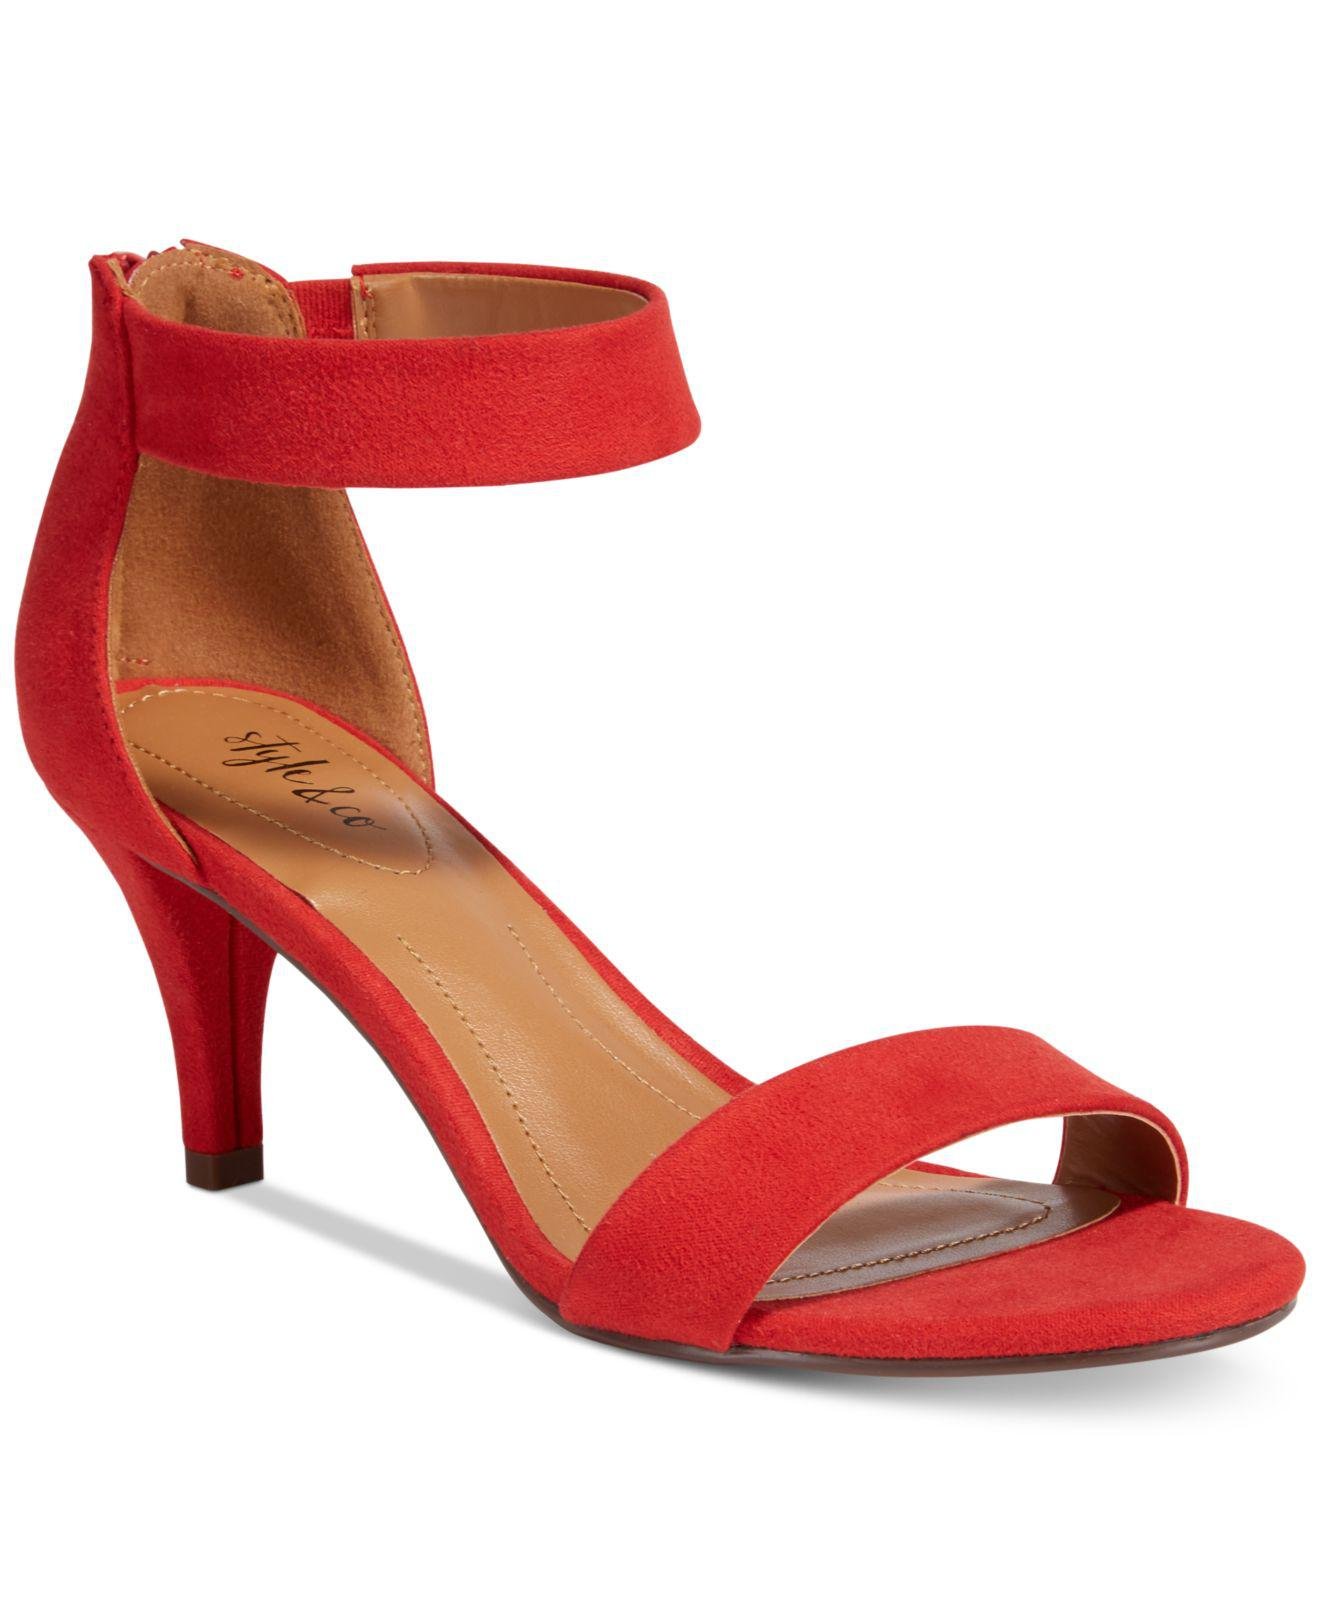 Style Co Paycee Two piece Dress Sandals  Created For Macy s in Red Lyst